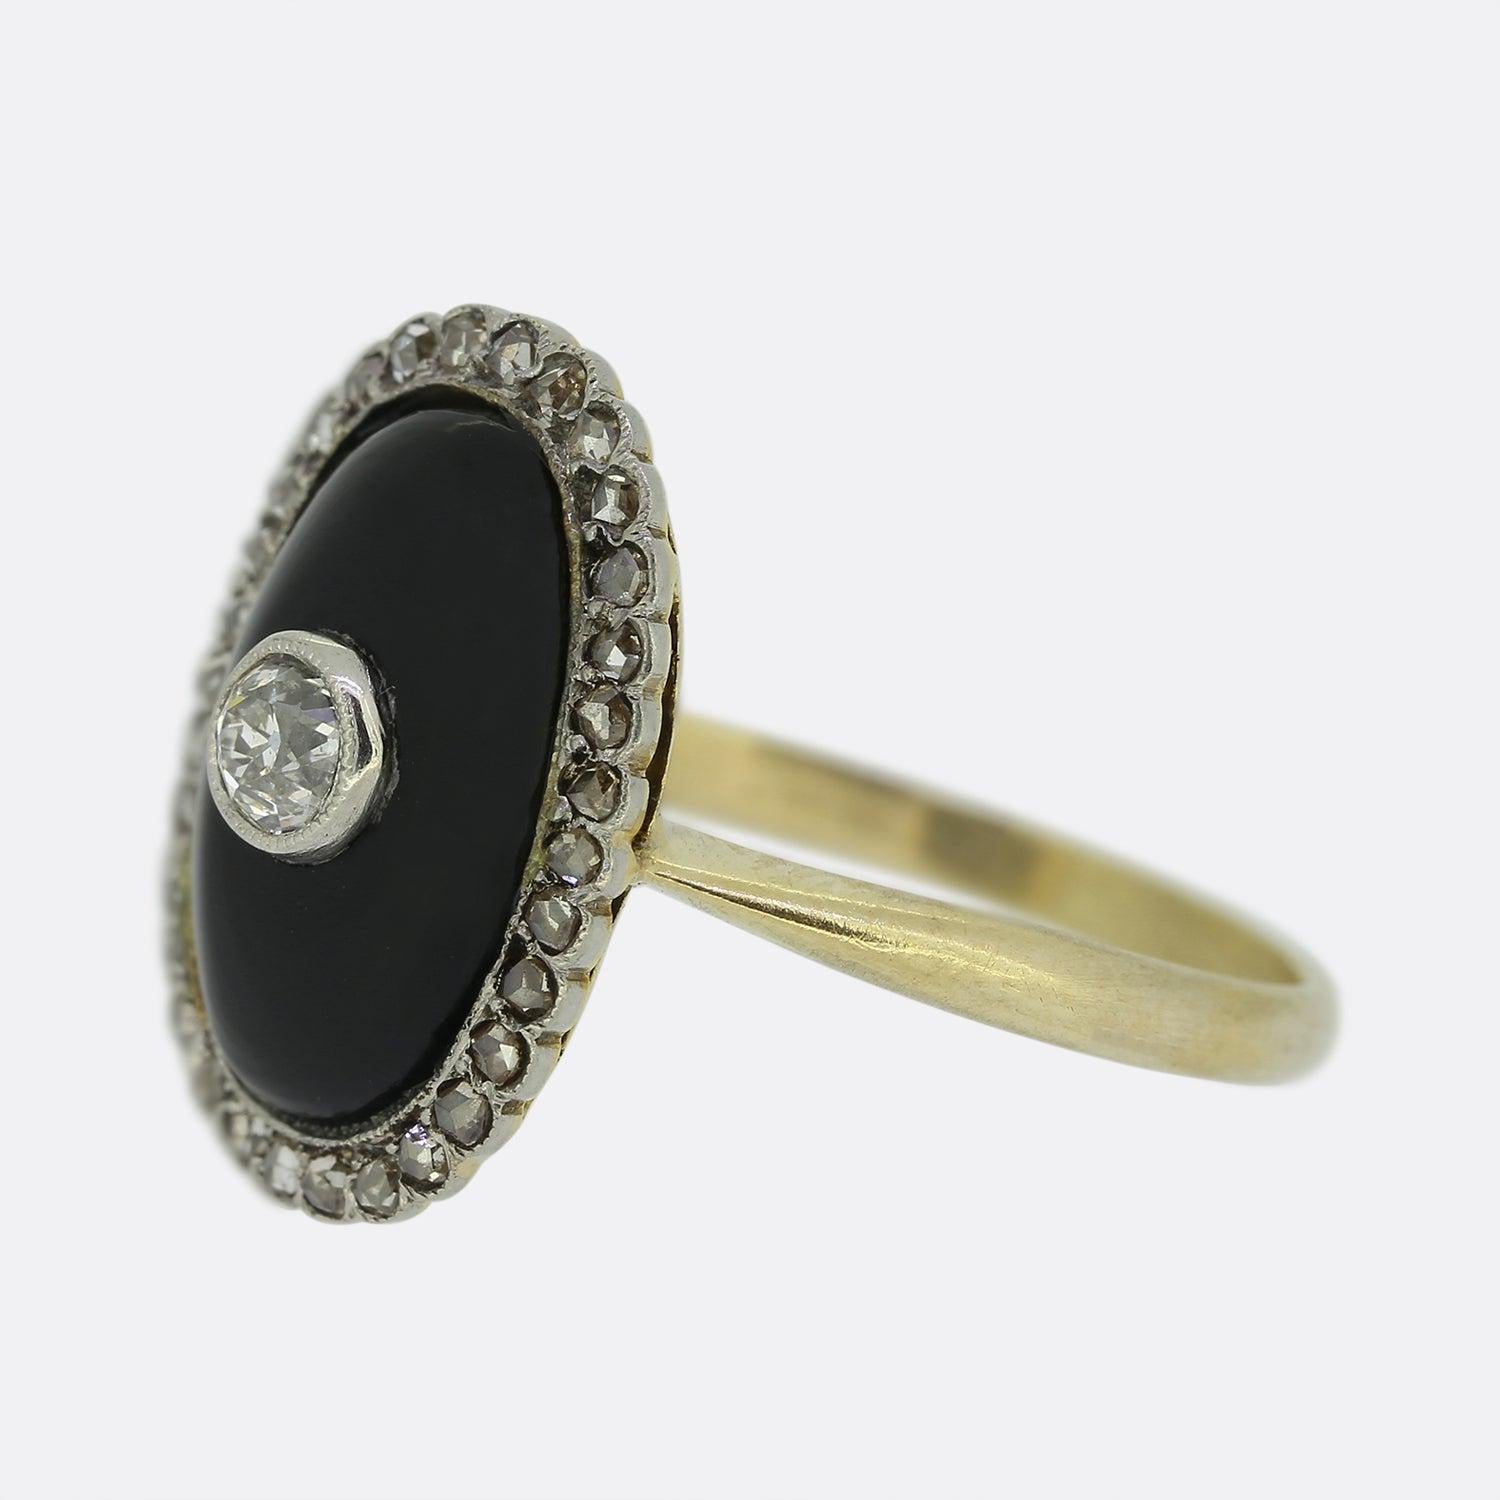 Here we have a wonderfully crafted diamond and onyx ring from the early stages of the 20th century. At the centre of an oval shaped onyx backdrop we find a single milgrain set old cut diamond which is surrounded by a frame of rose cut diamonds atop